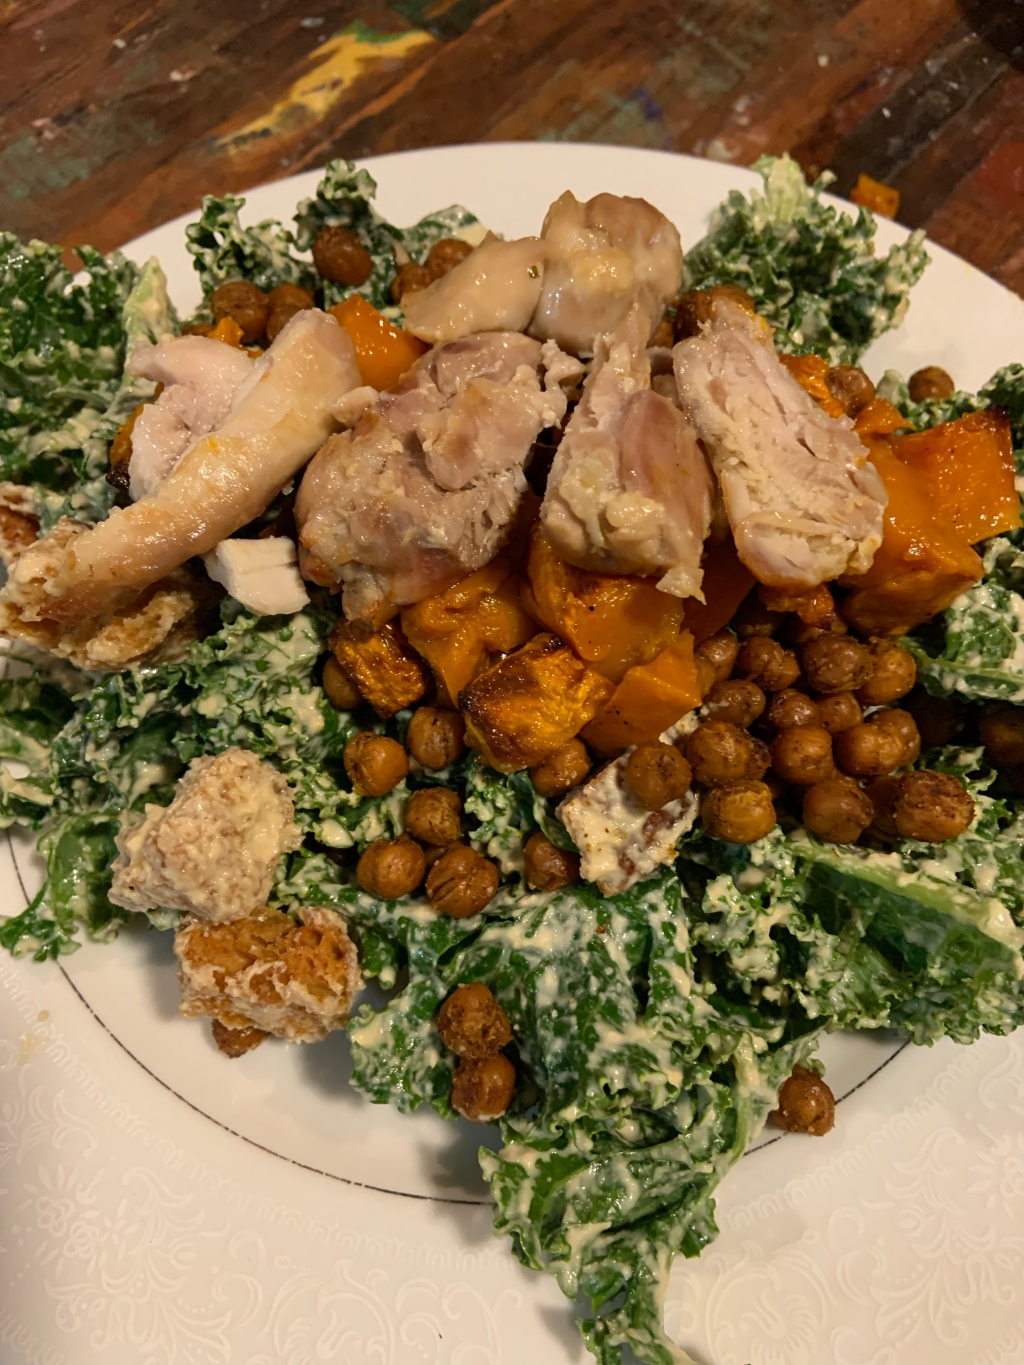 Creamy Kale Salad with Croutons, Squash and Crispy Chickpeas